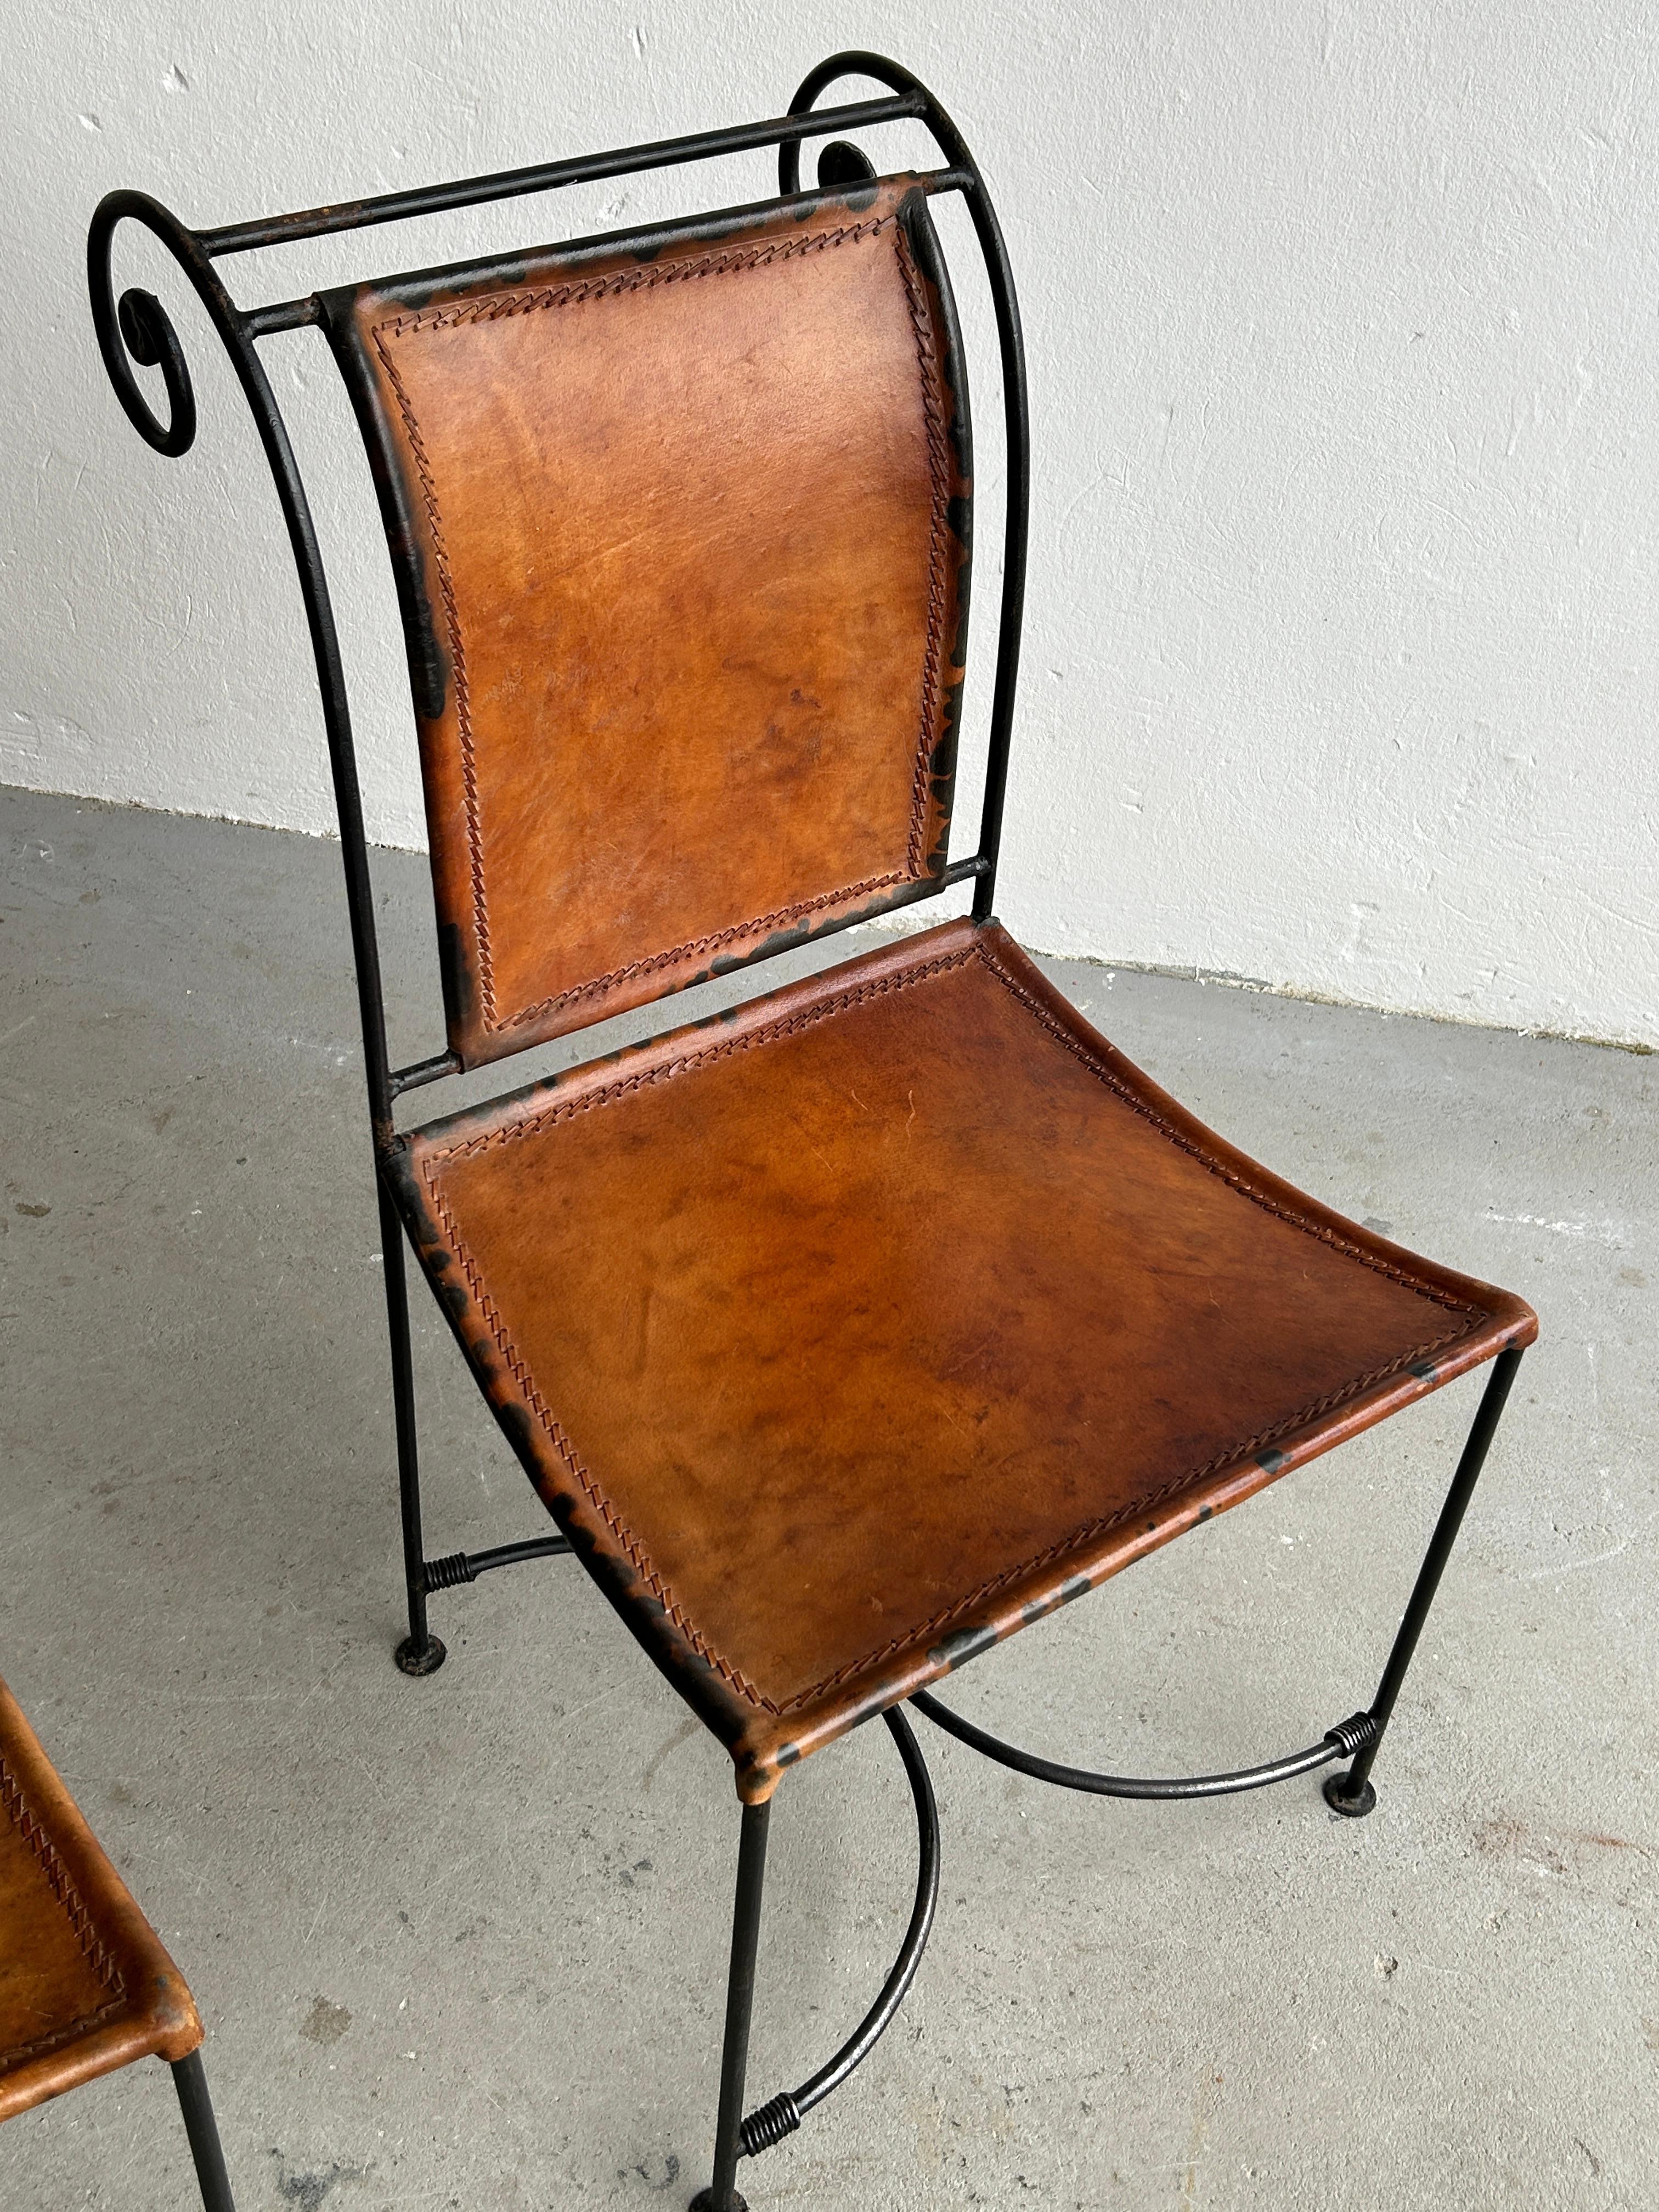 Mid-20th Century Vintage Sculptural Wrought Iron and Leather Handcrafted Accent Chairs